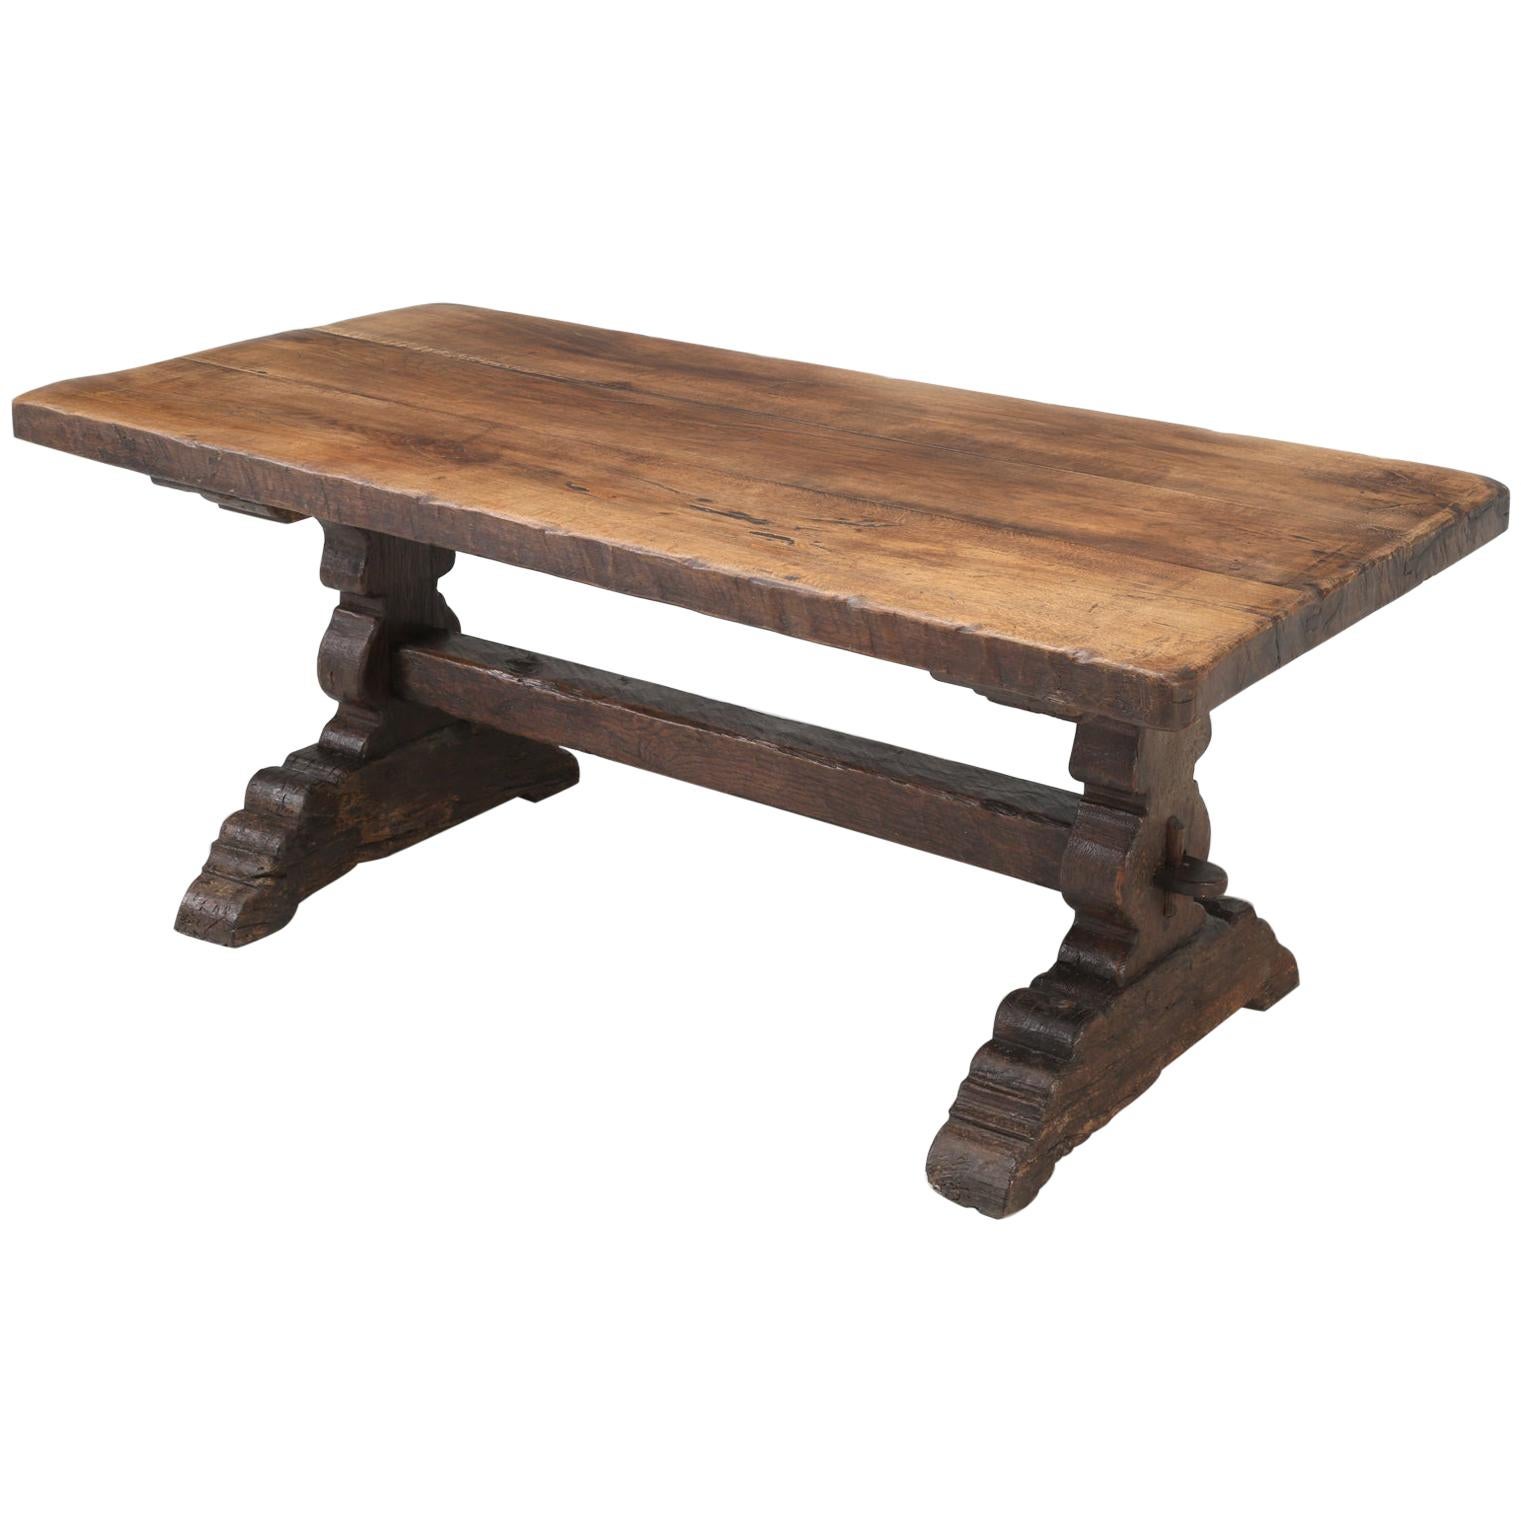 Original Antique French Farm or Trestle Table, circa 200 Years Old, Unrestored